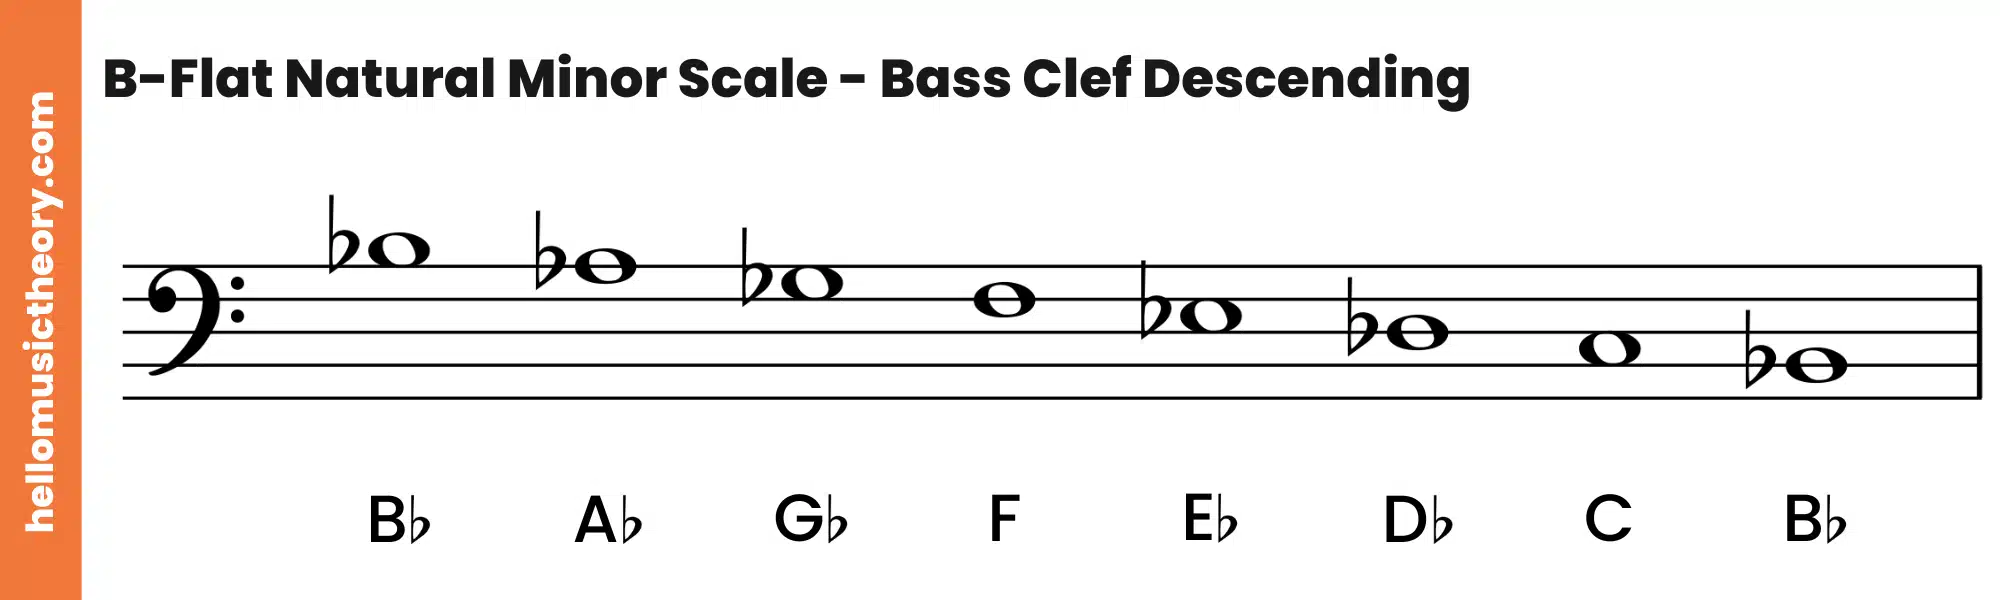 B-Flat Natural Minor Scale Bass Clef Descending